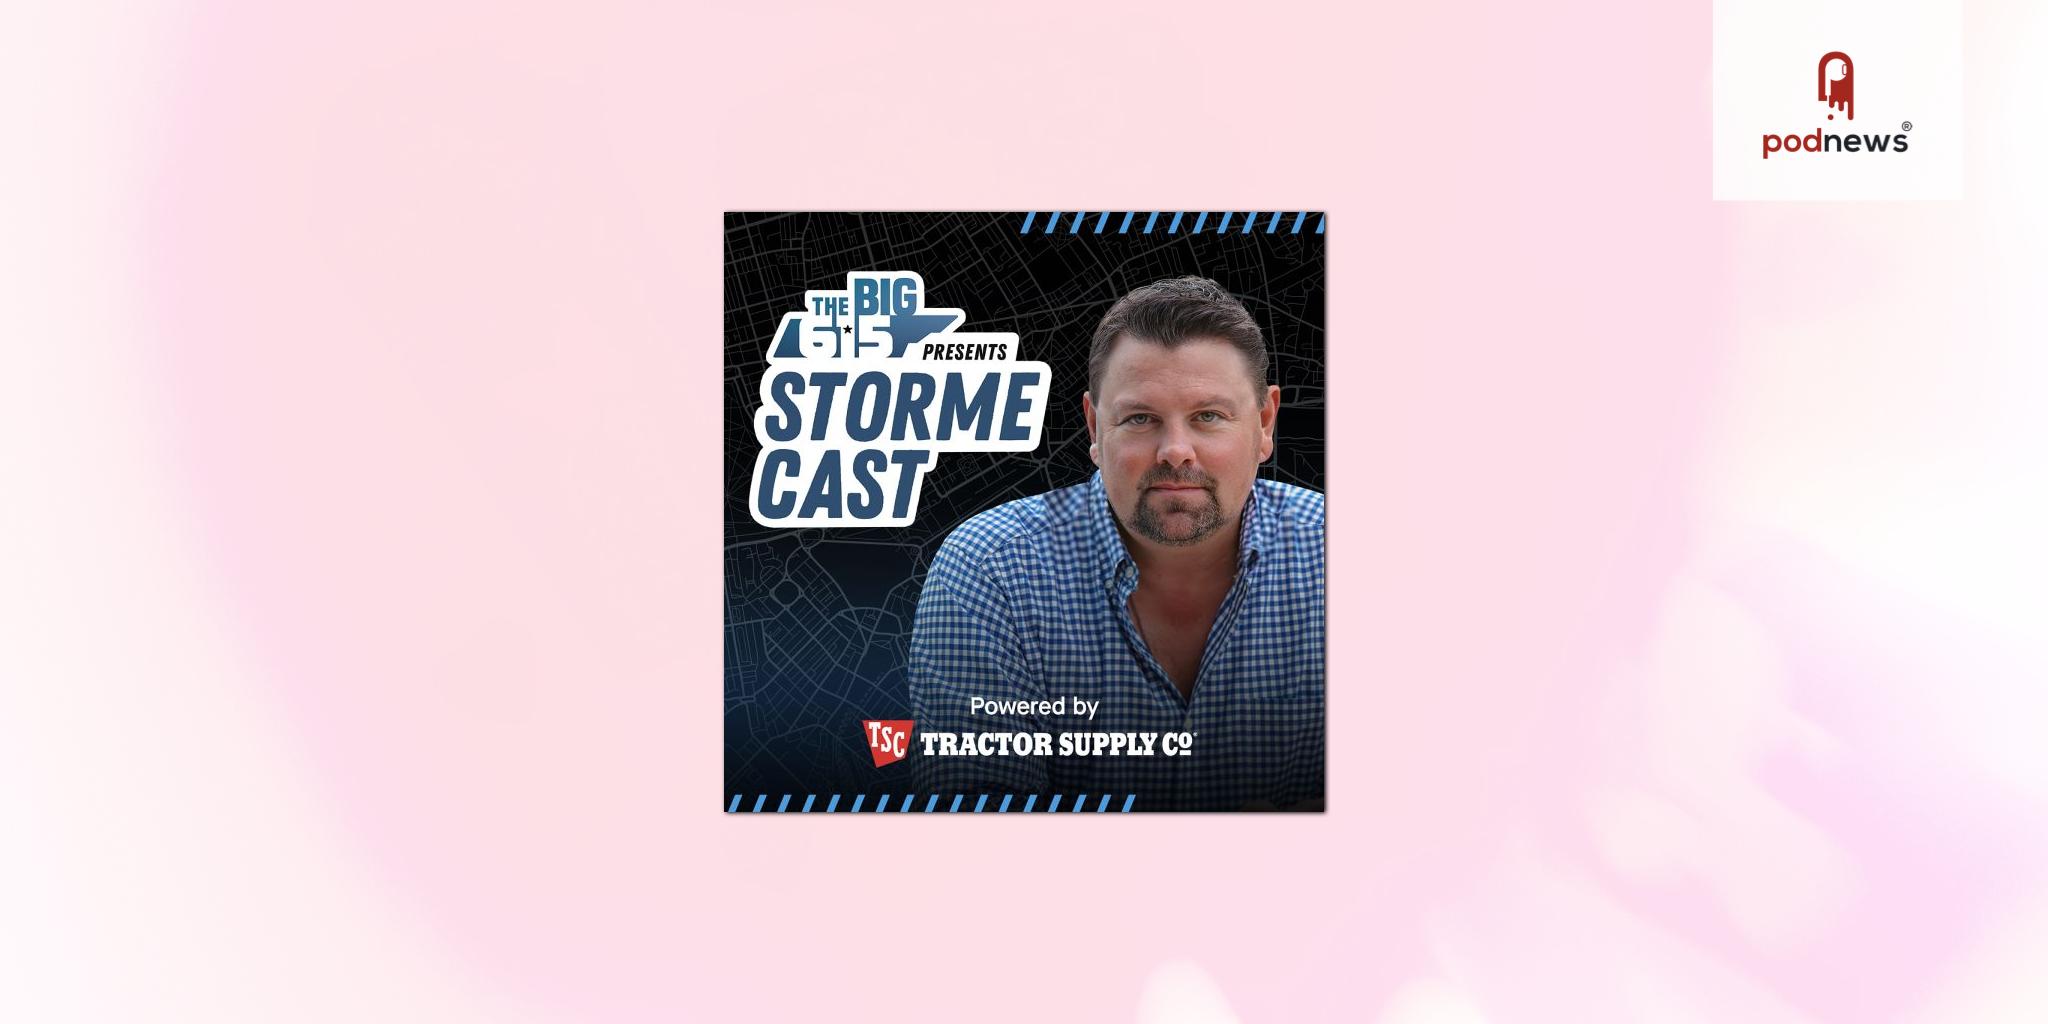 Garth Brooks’ The BIG 615 and TuneIn Launch ‘The StormeCast’ Podcast with Host Storme